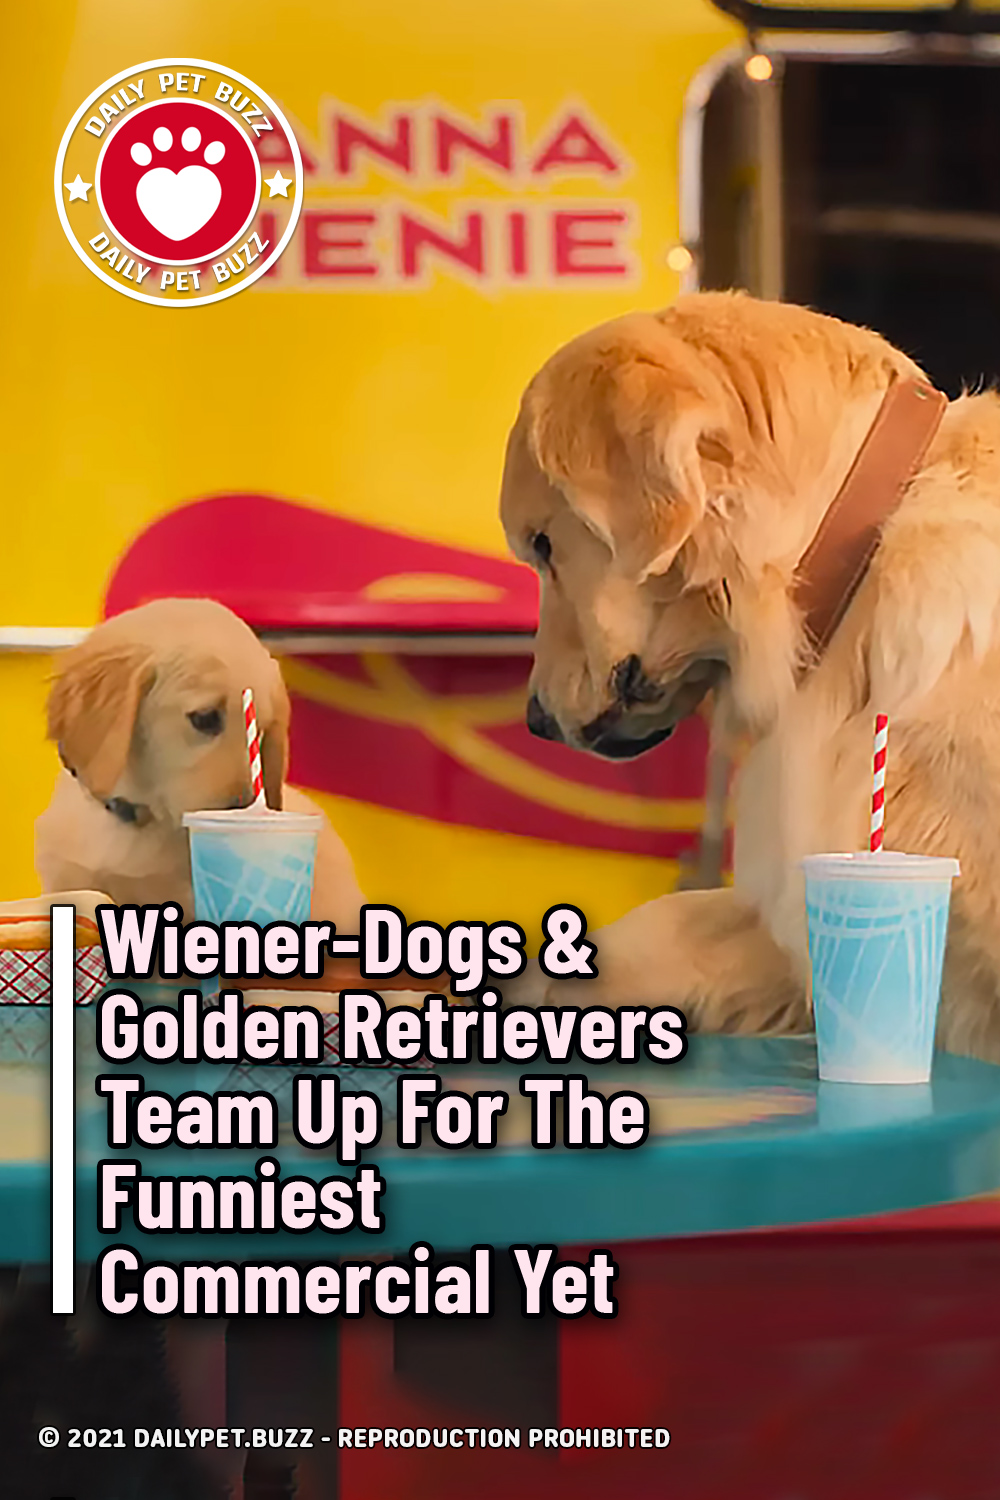 Wiener-Dogs & Golden Retrievers Team Up For The Funniest Commercial Yet